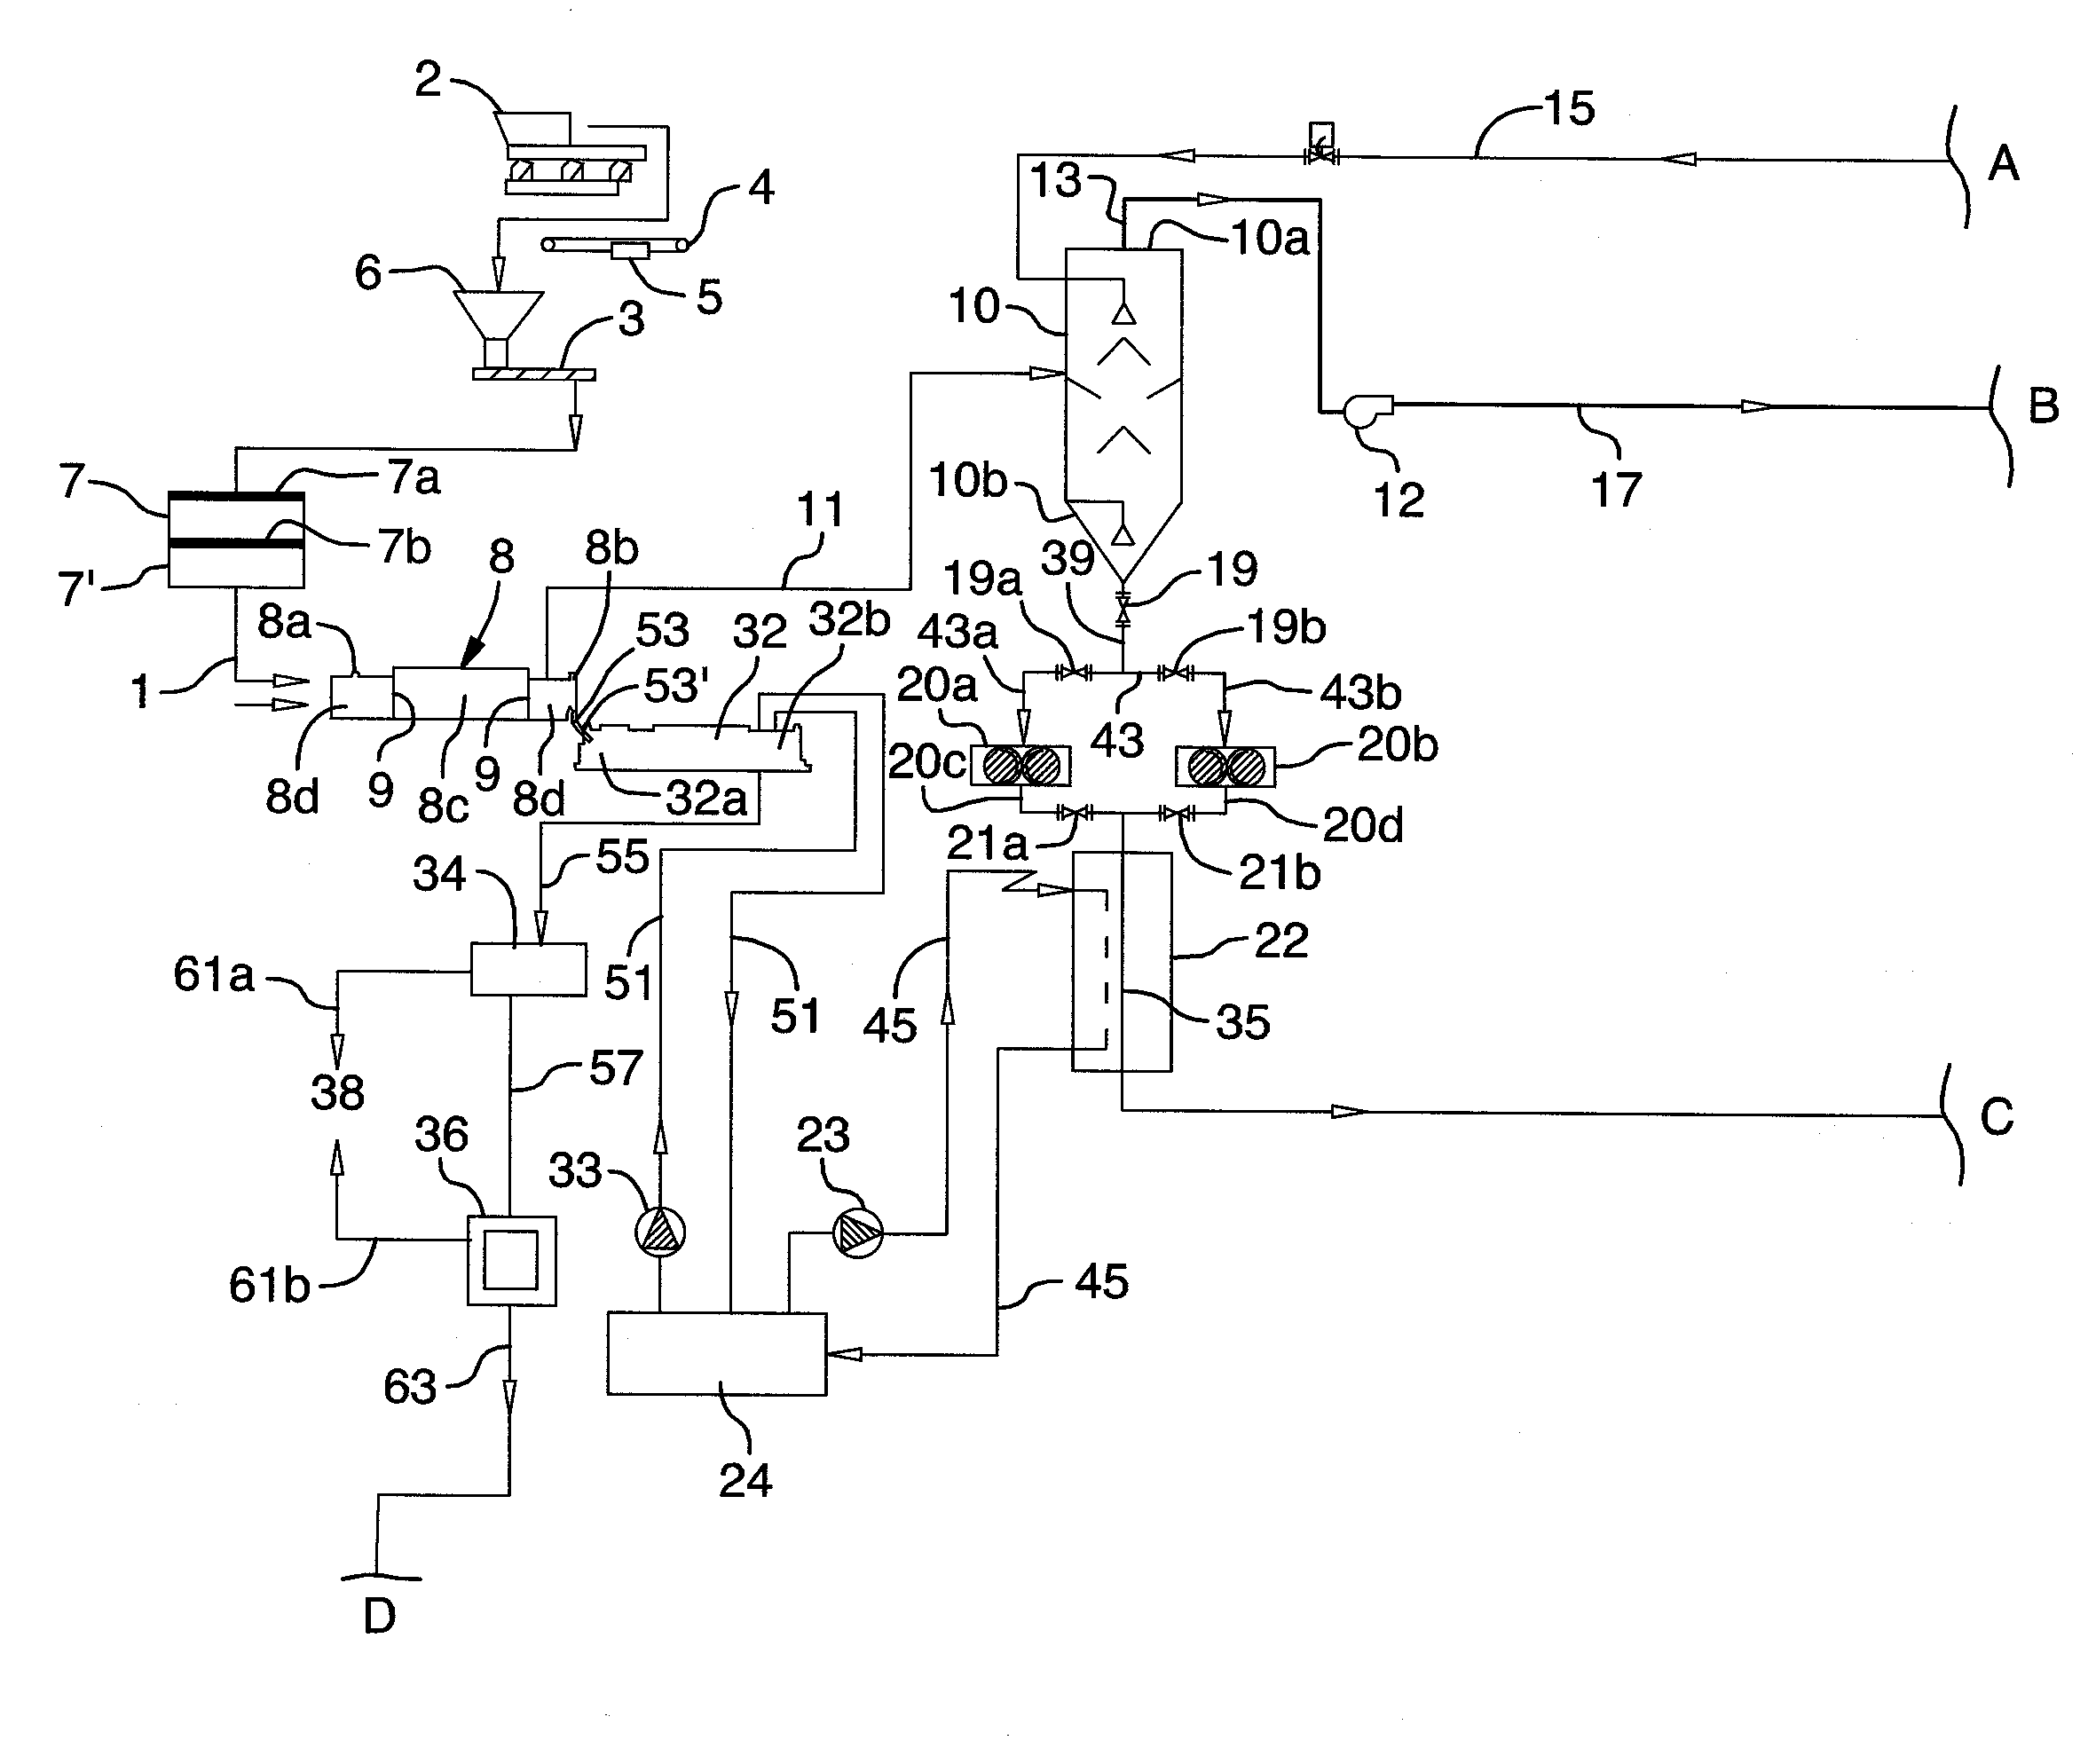 Method of Reclaiming Carbonaceous Materials From Scrap Tires and Products Derived Therefrom